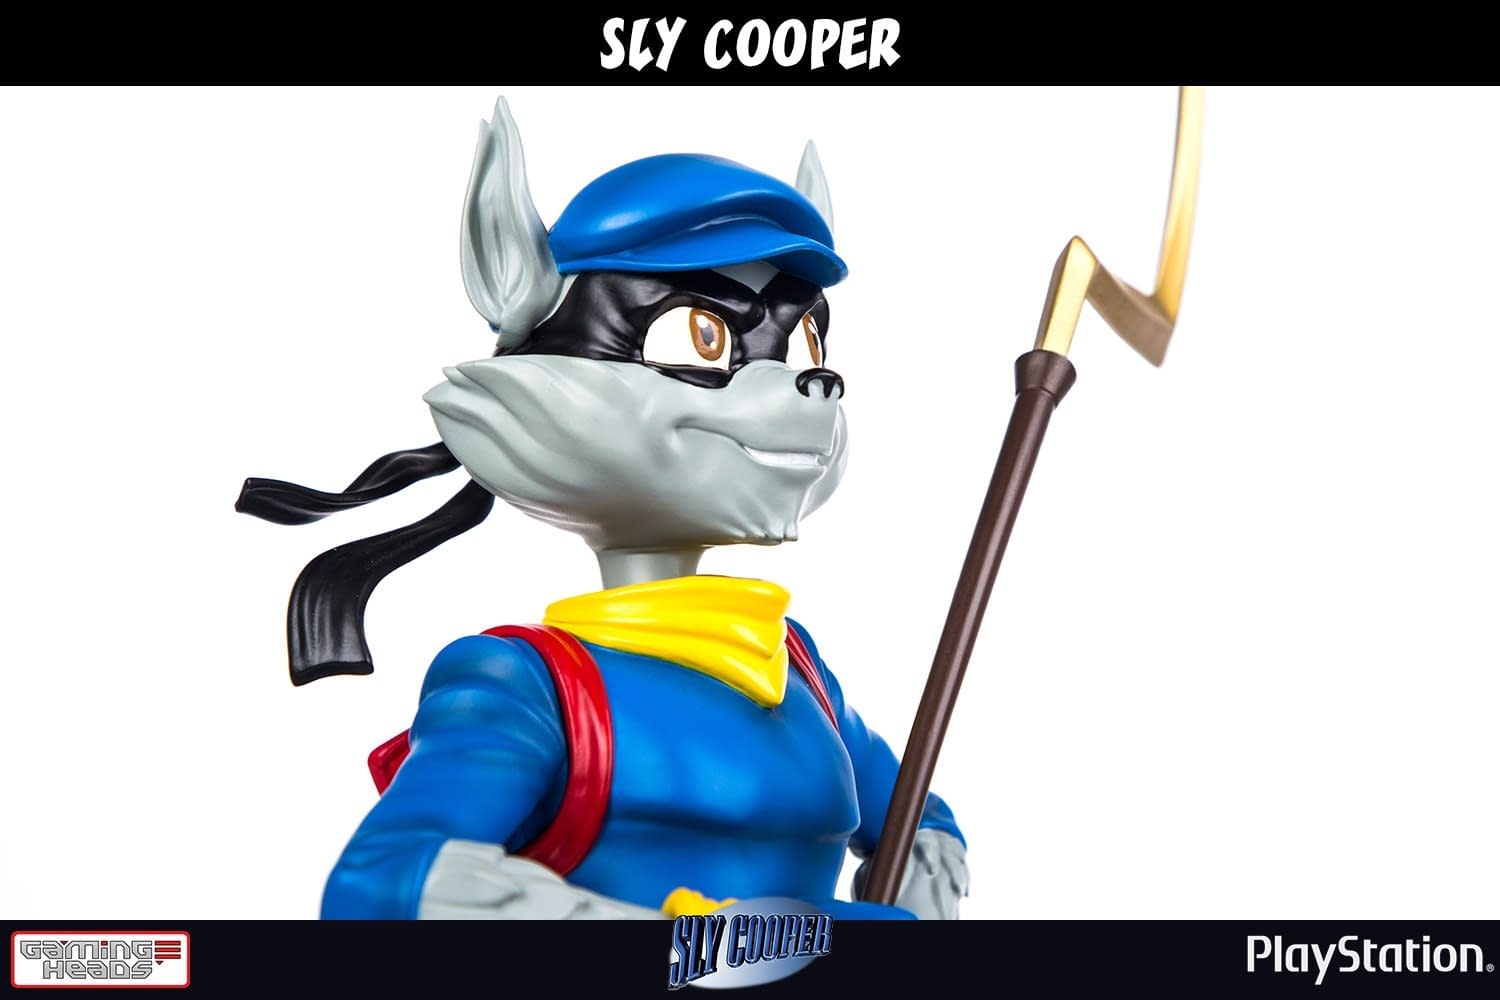 Sly Cooper 3 Classic Edition Statue by Gaming Heads